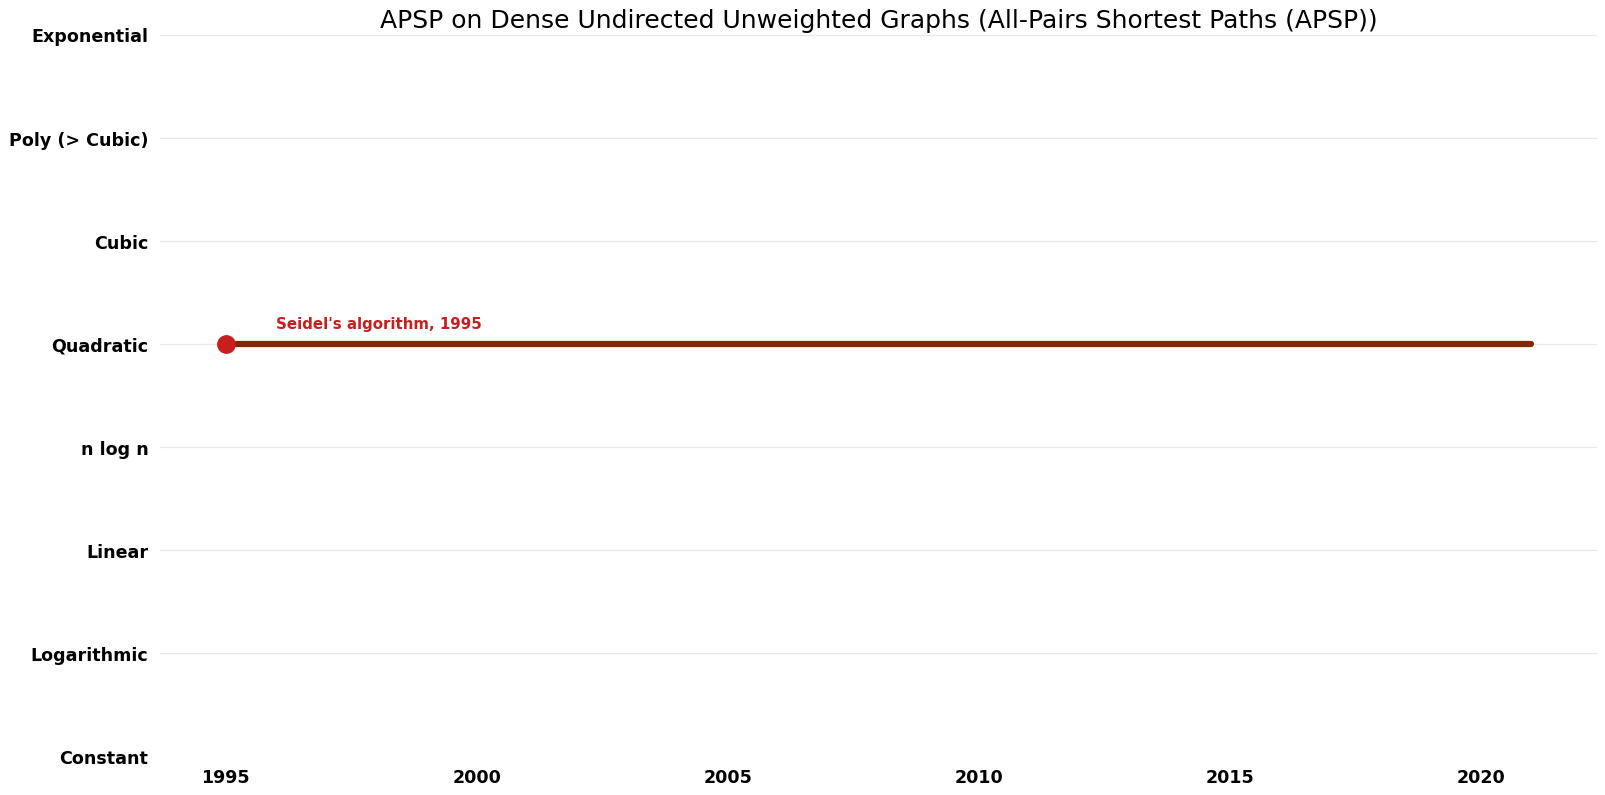 File:All-Pairs Shortest Paths (APSP) - APSP on Dense Undirected Unweighted Graphs - Space.png